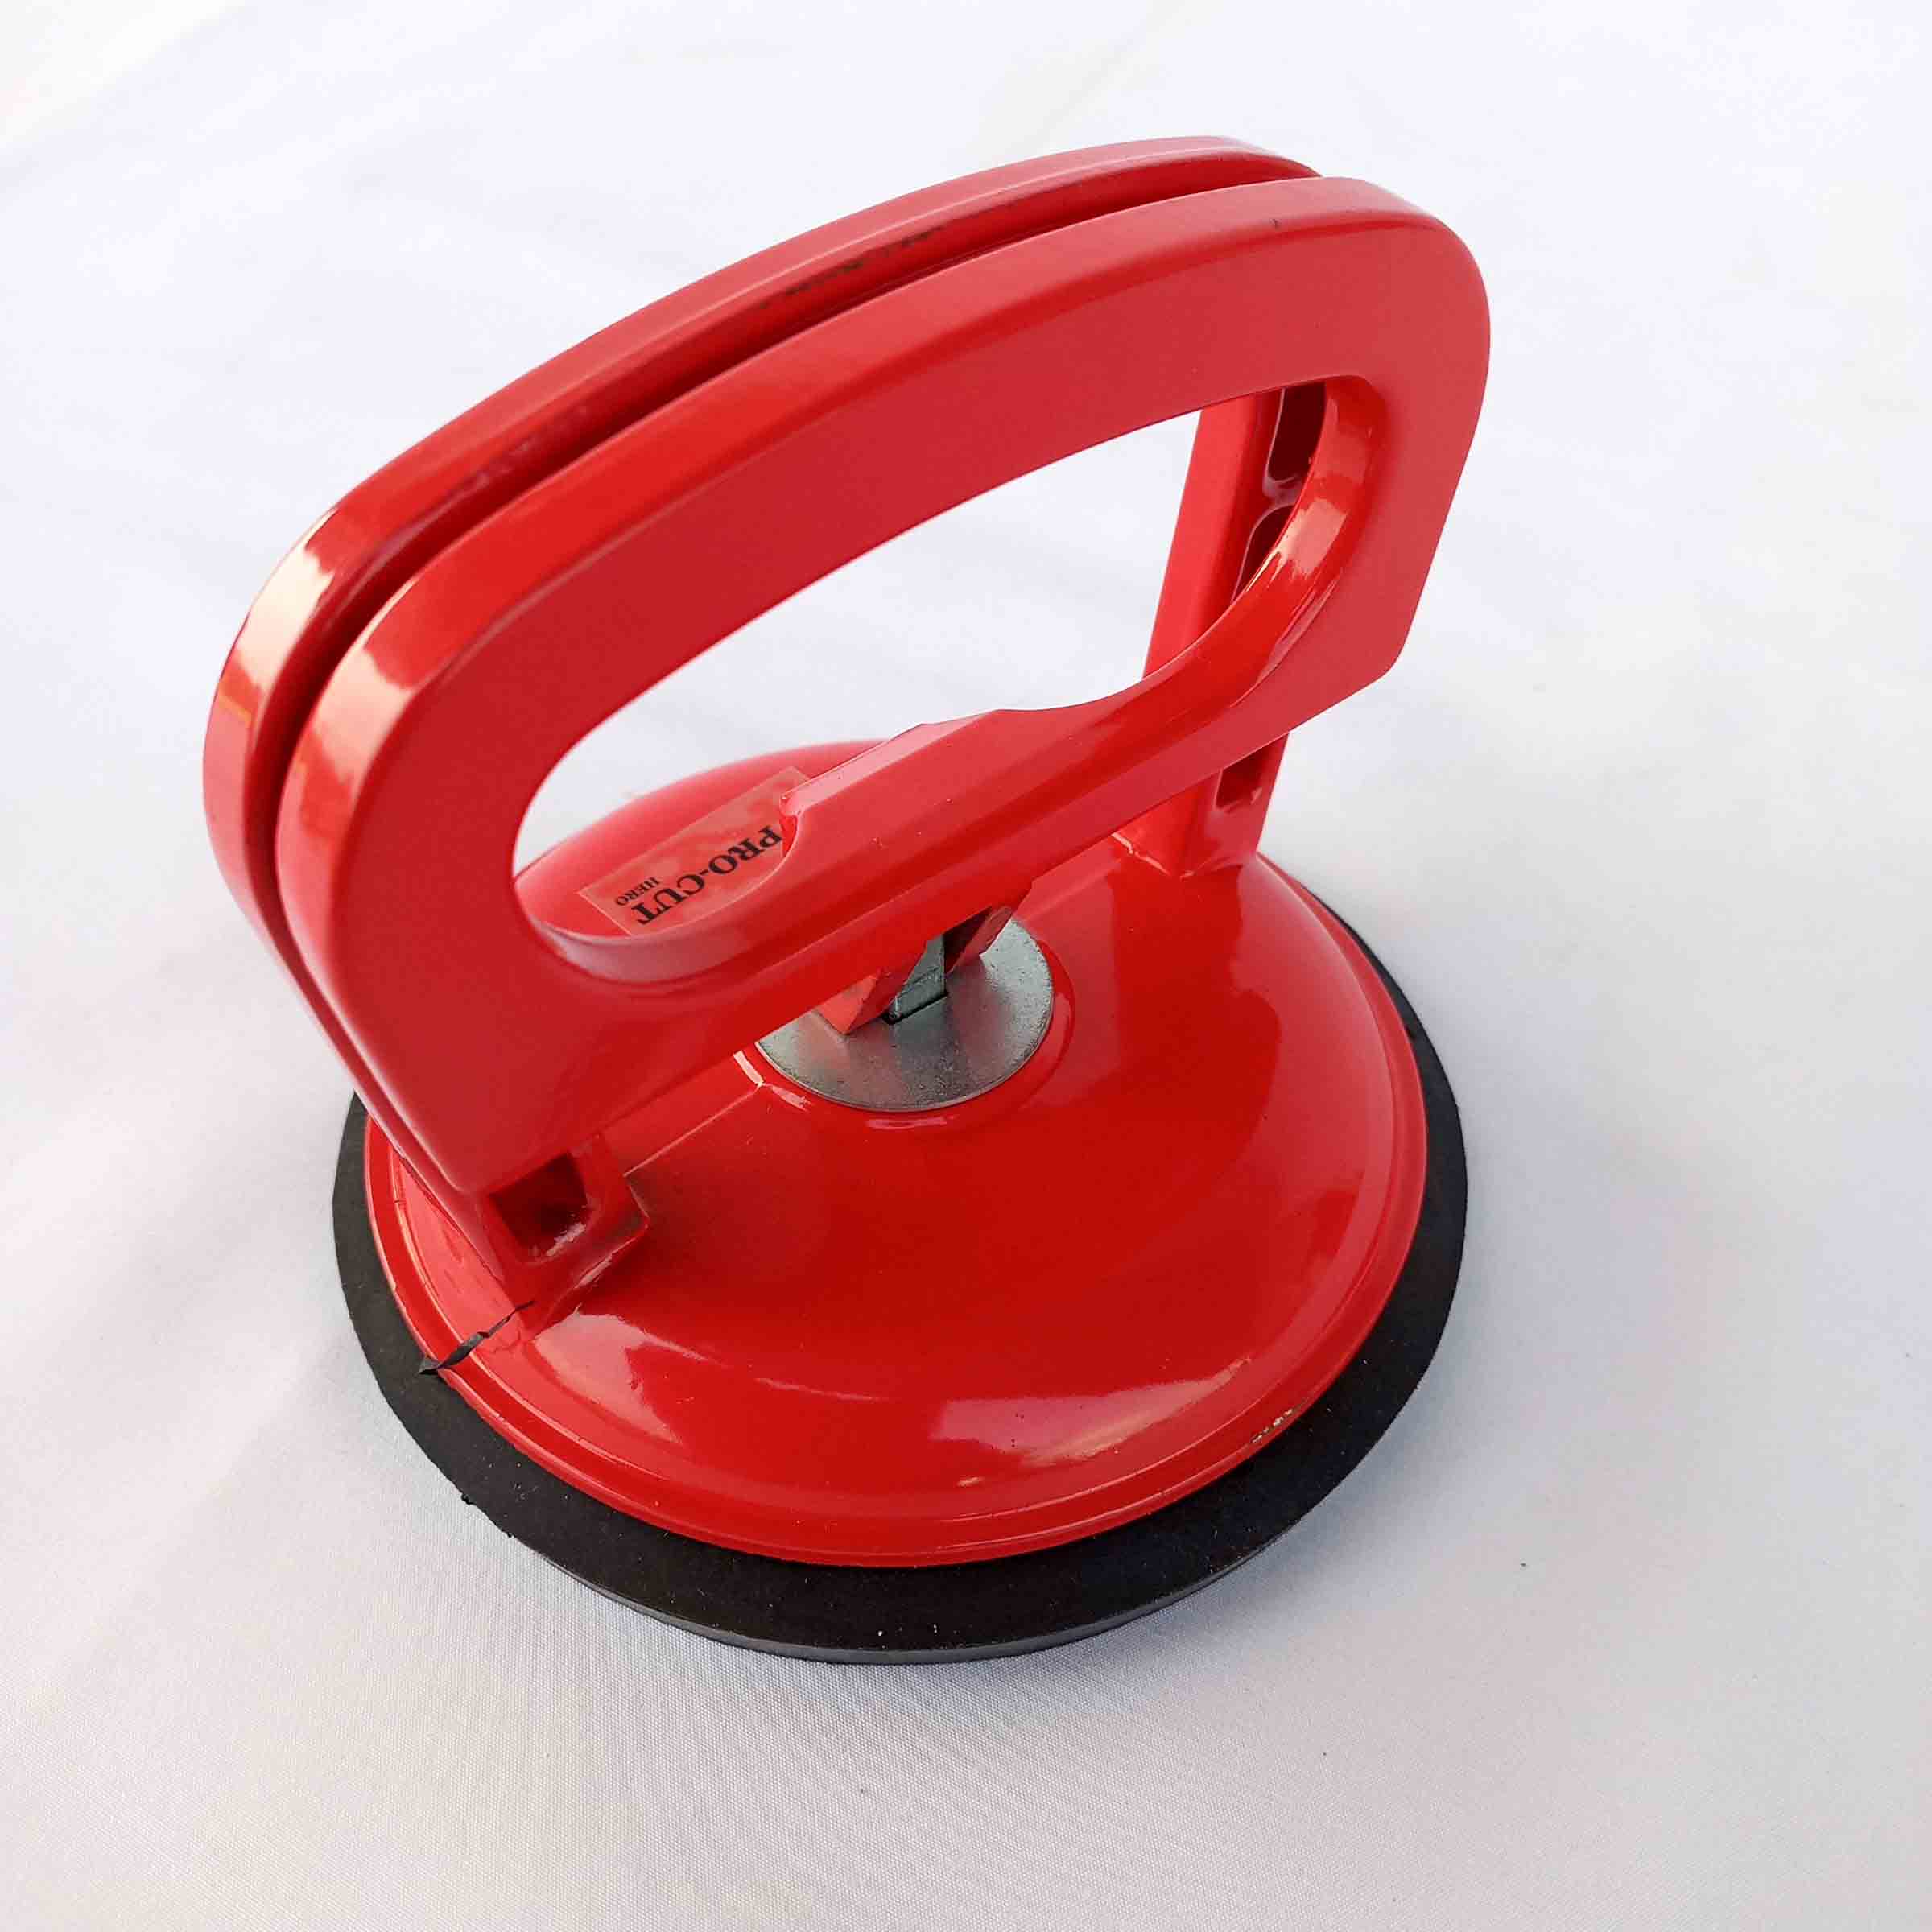 Vacuum Suction Lifter (Single Cup)(130 kgs) - Vacuum Suction Cup